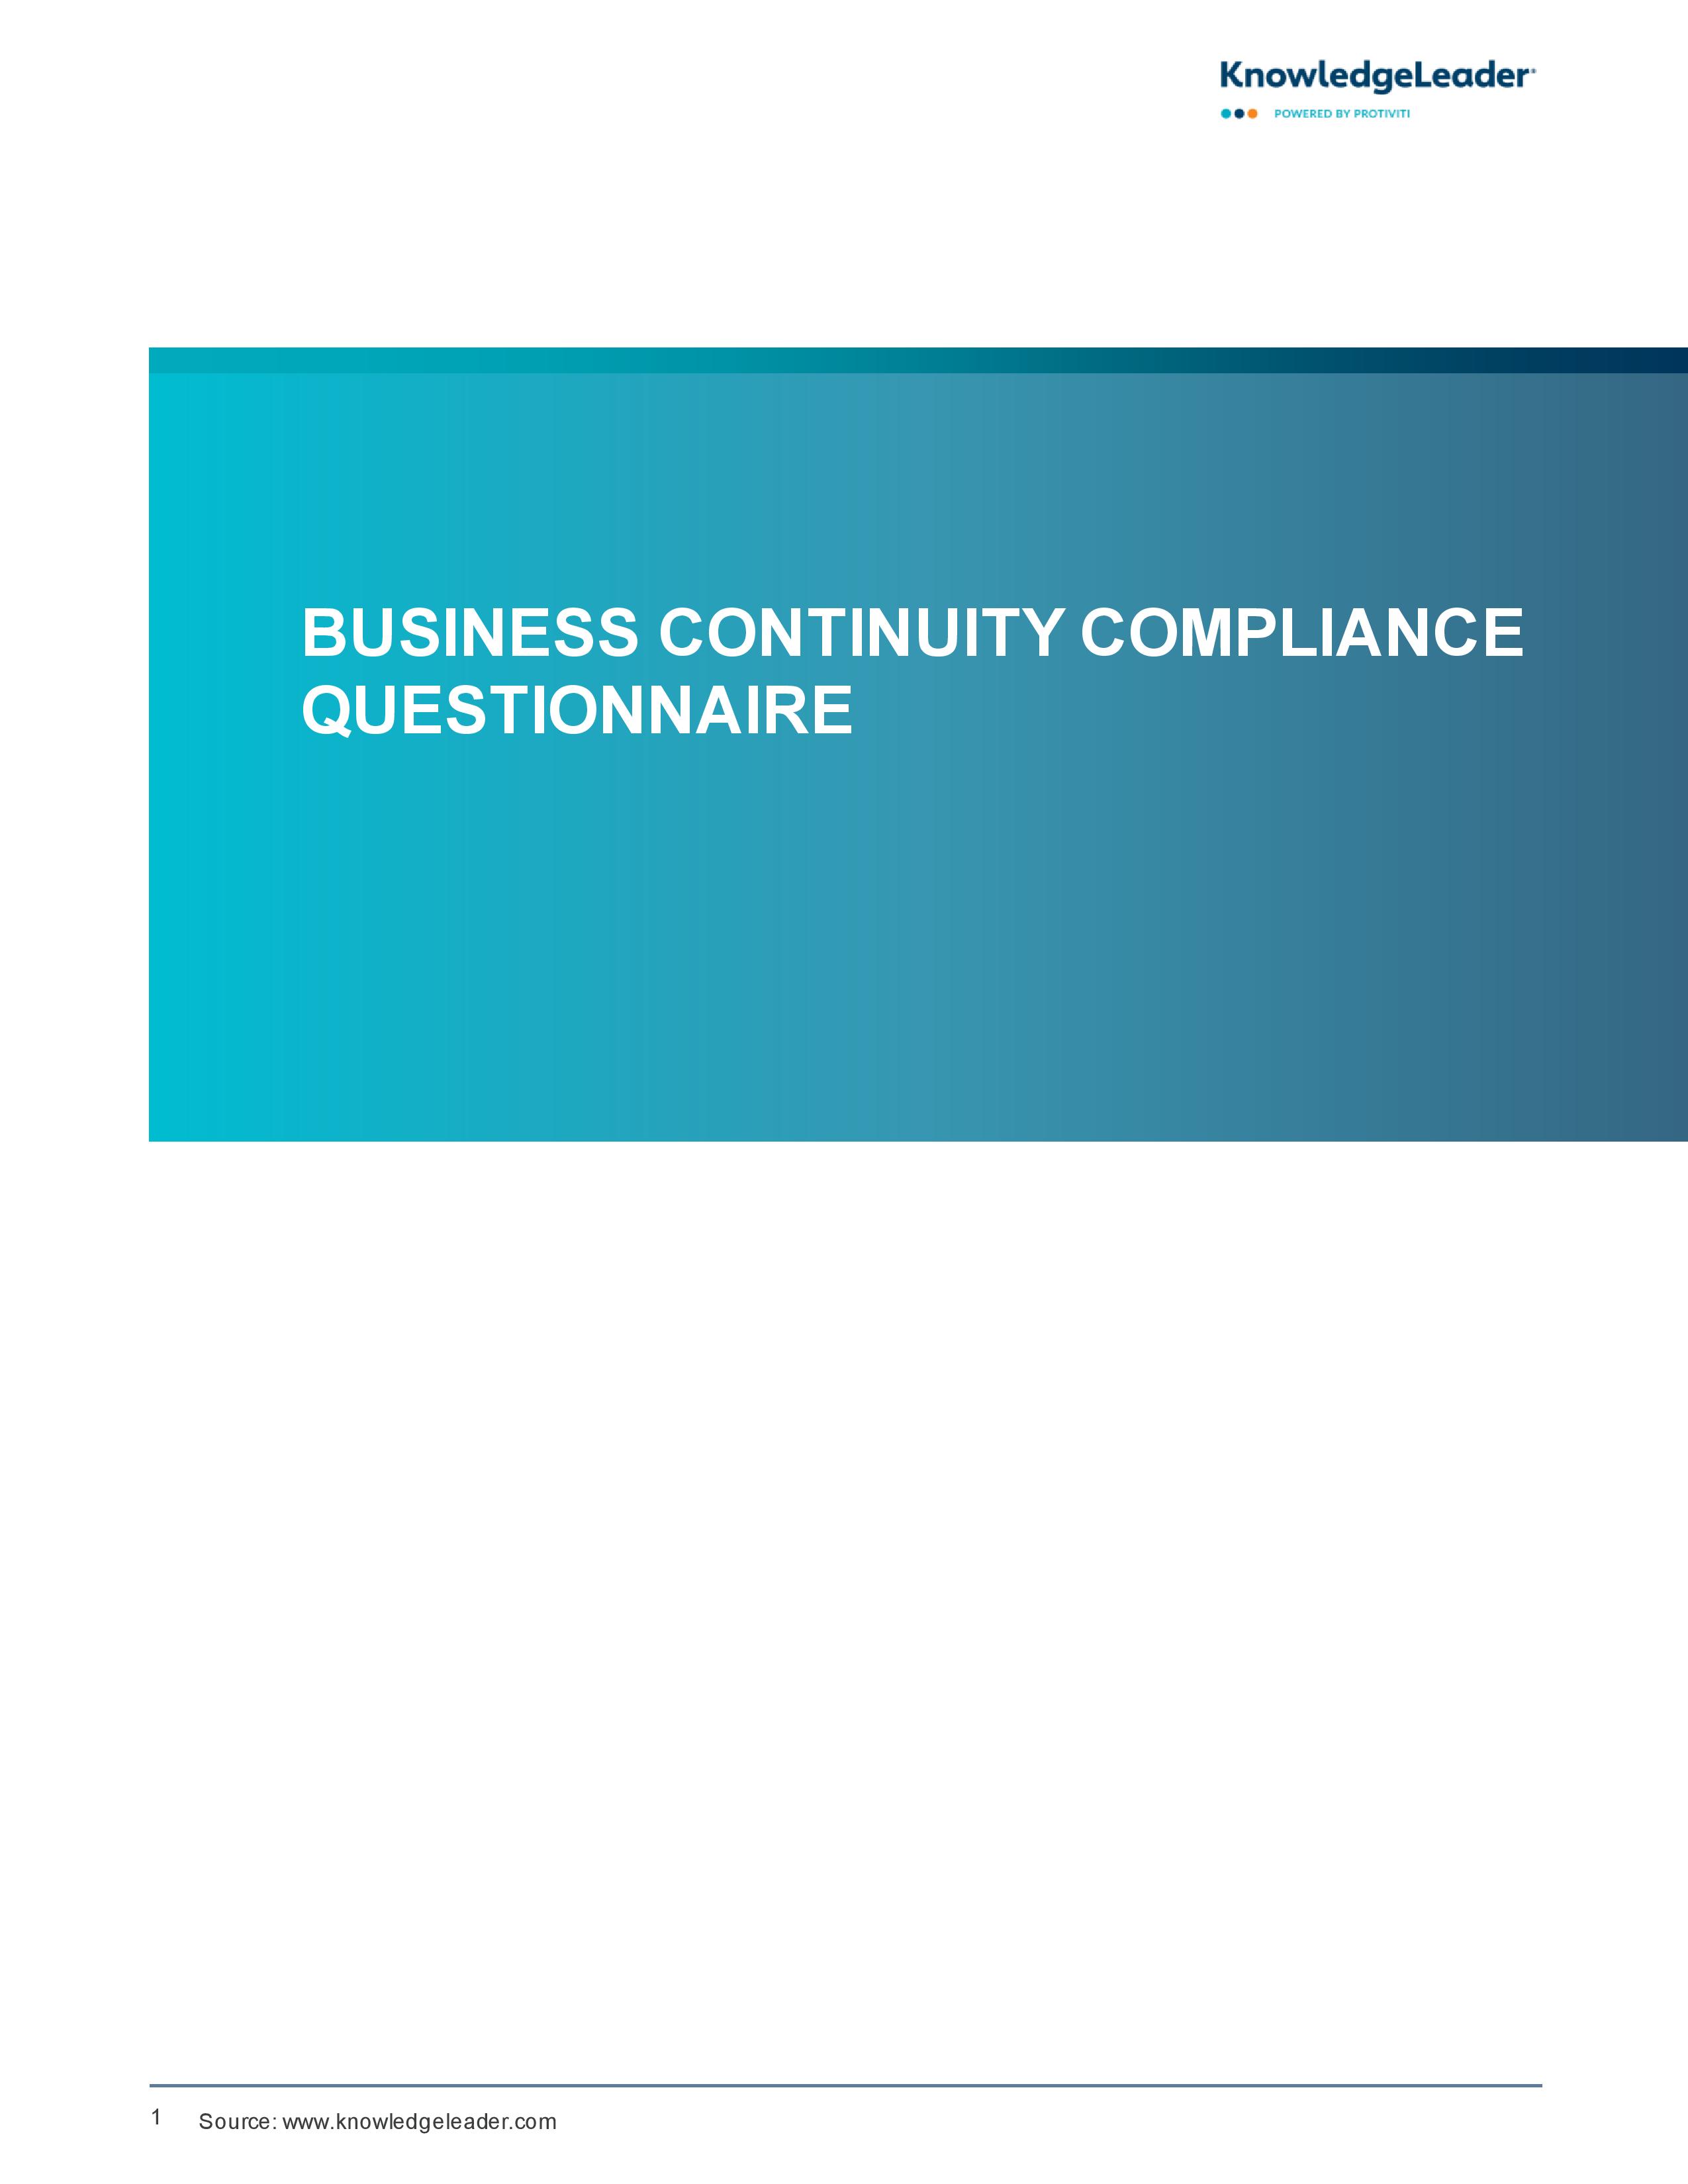 Screenshot of the first page of Business Continuity Compliance Questionnaire